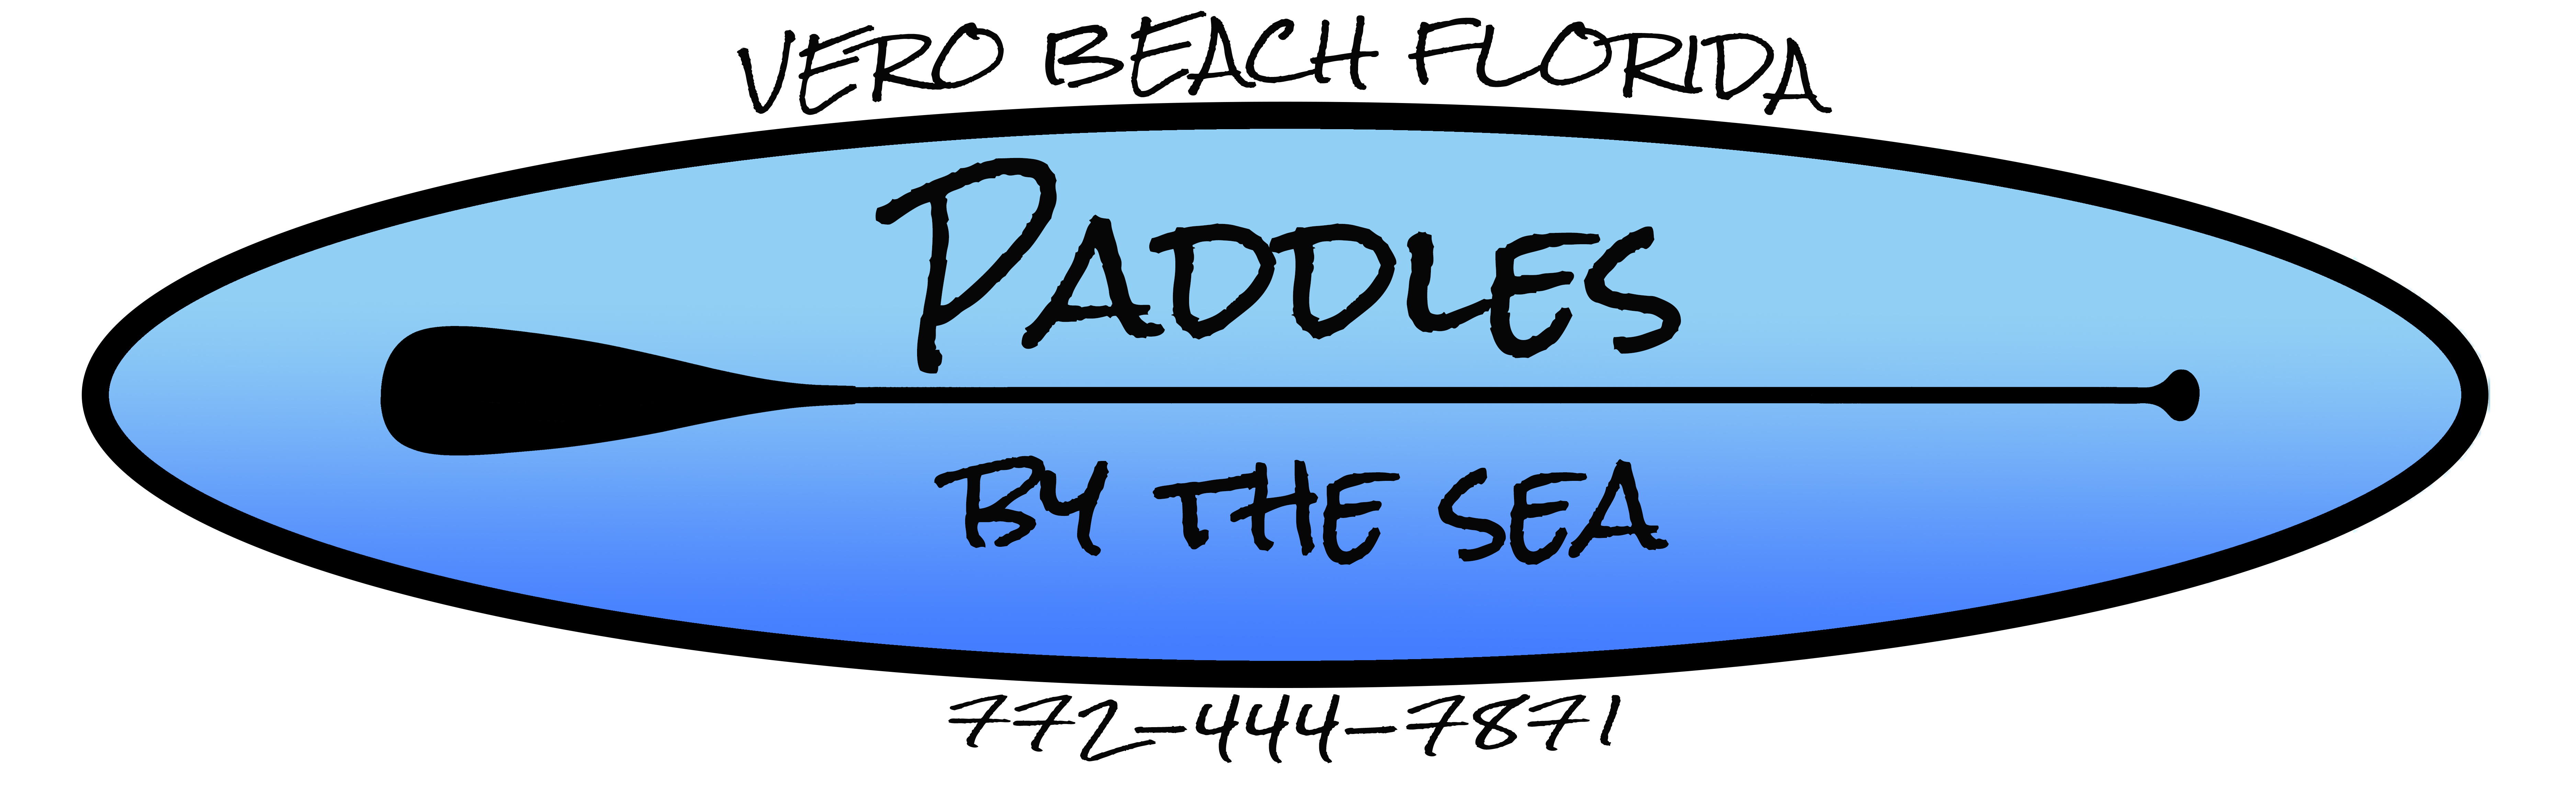 Paddles By The Sea